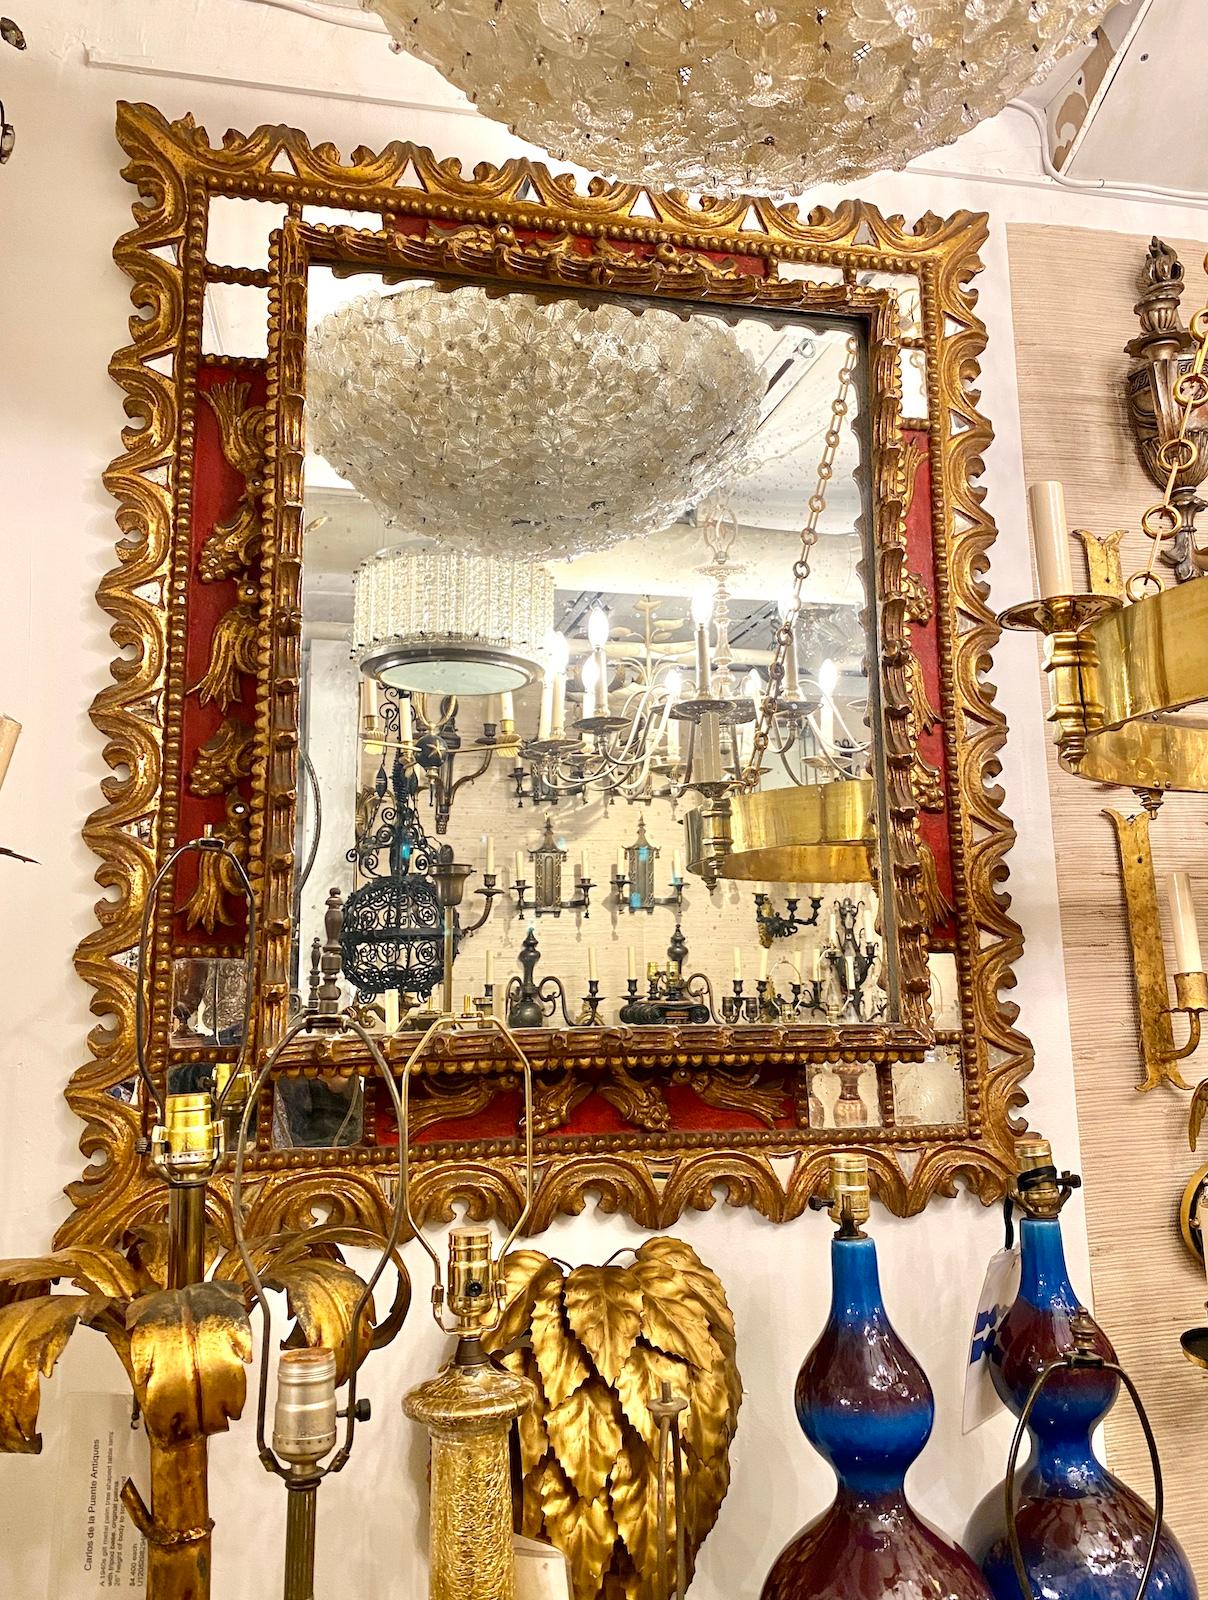 A late 19th Century Spanish Colonial mirror with gilt and painted finish and mirror insets in frame.

Measurements:
Height: 43